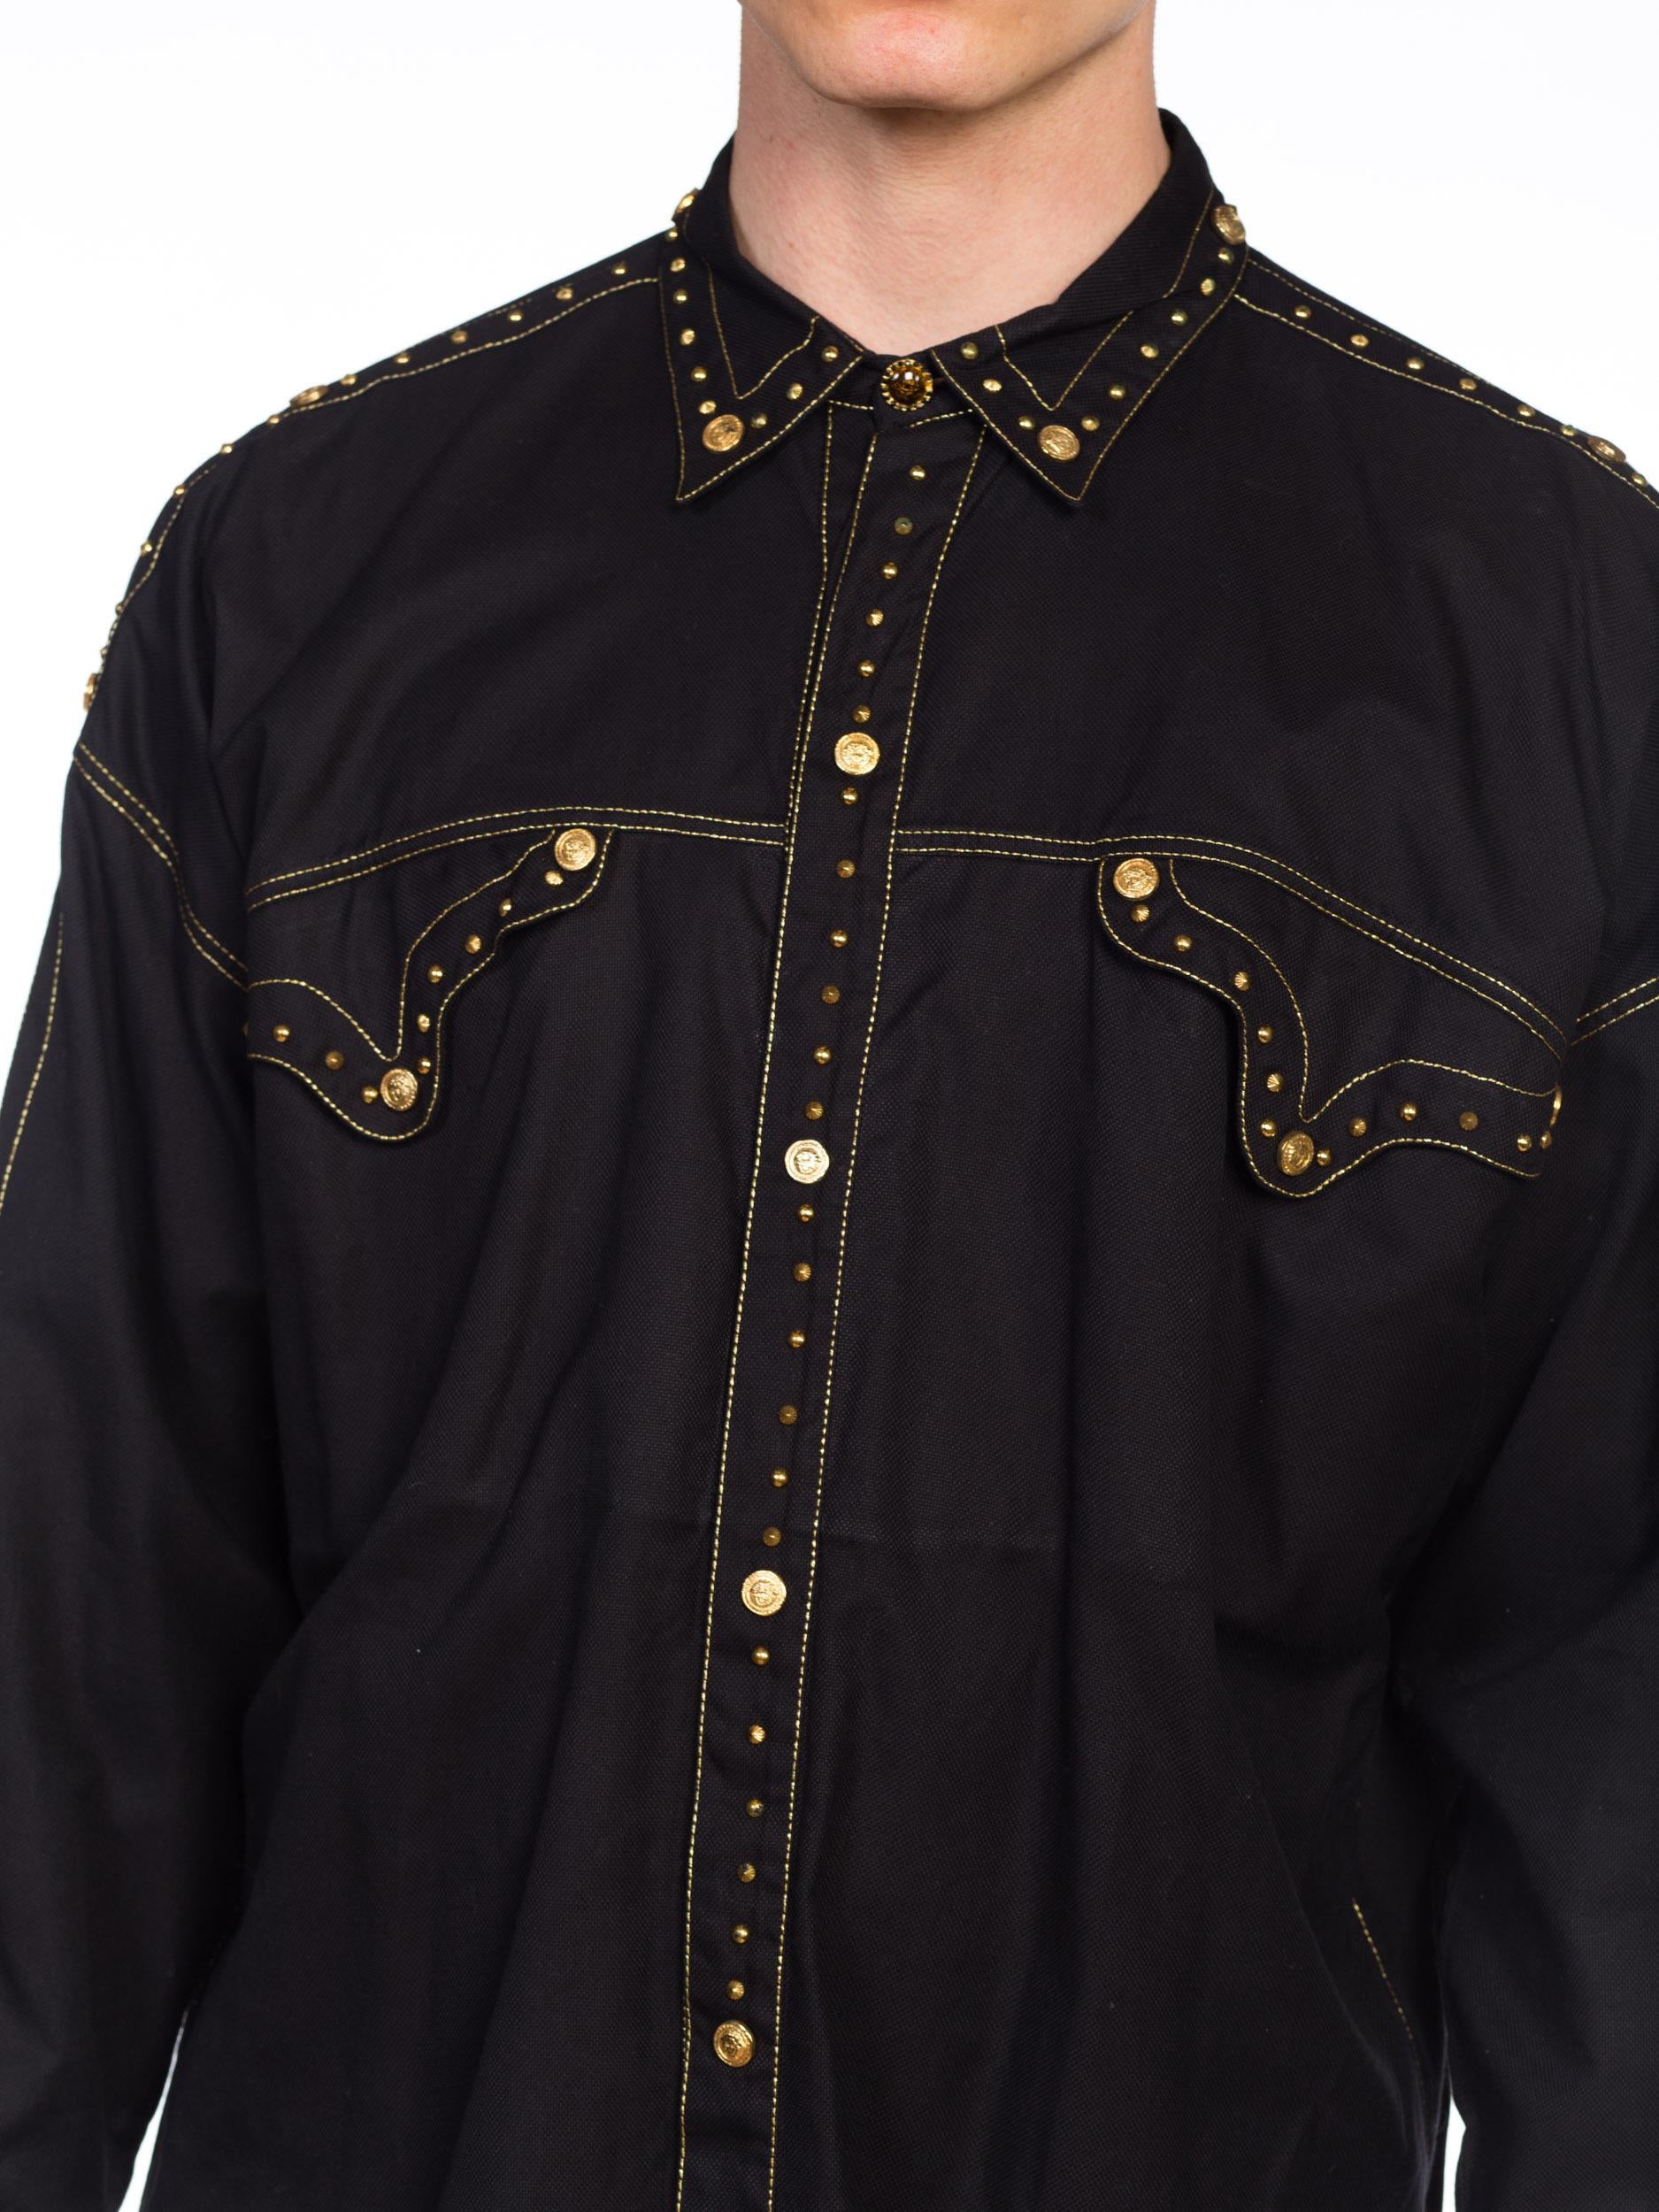 1990S GIANNI VERSACE Men's Shirt With Gold Medusa Studs & Metallic Embroidery 6